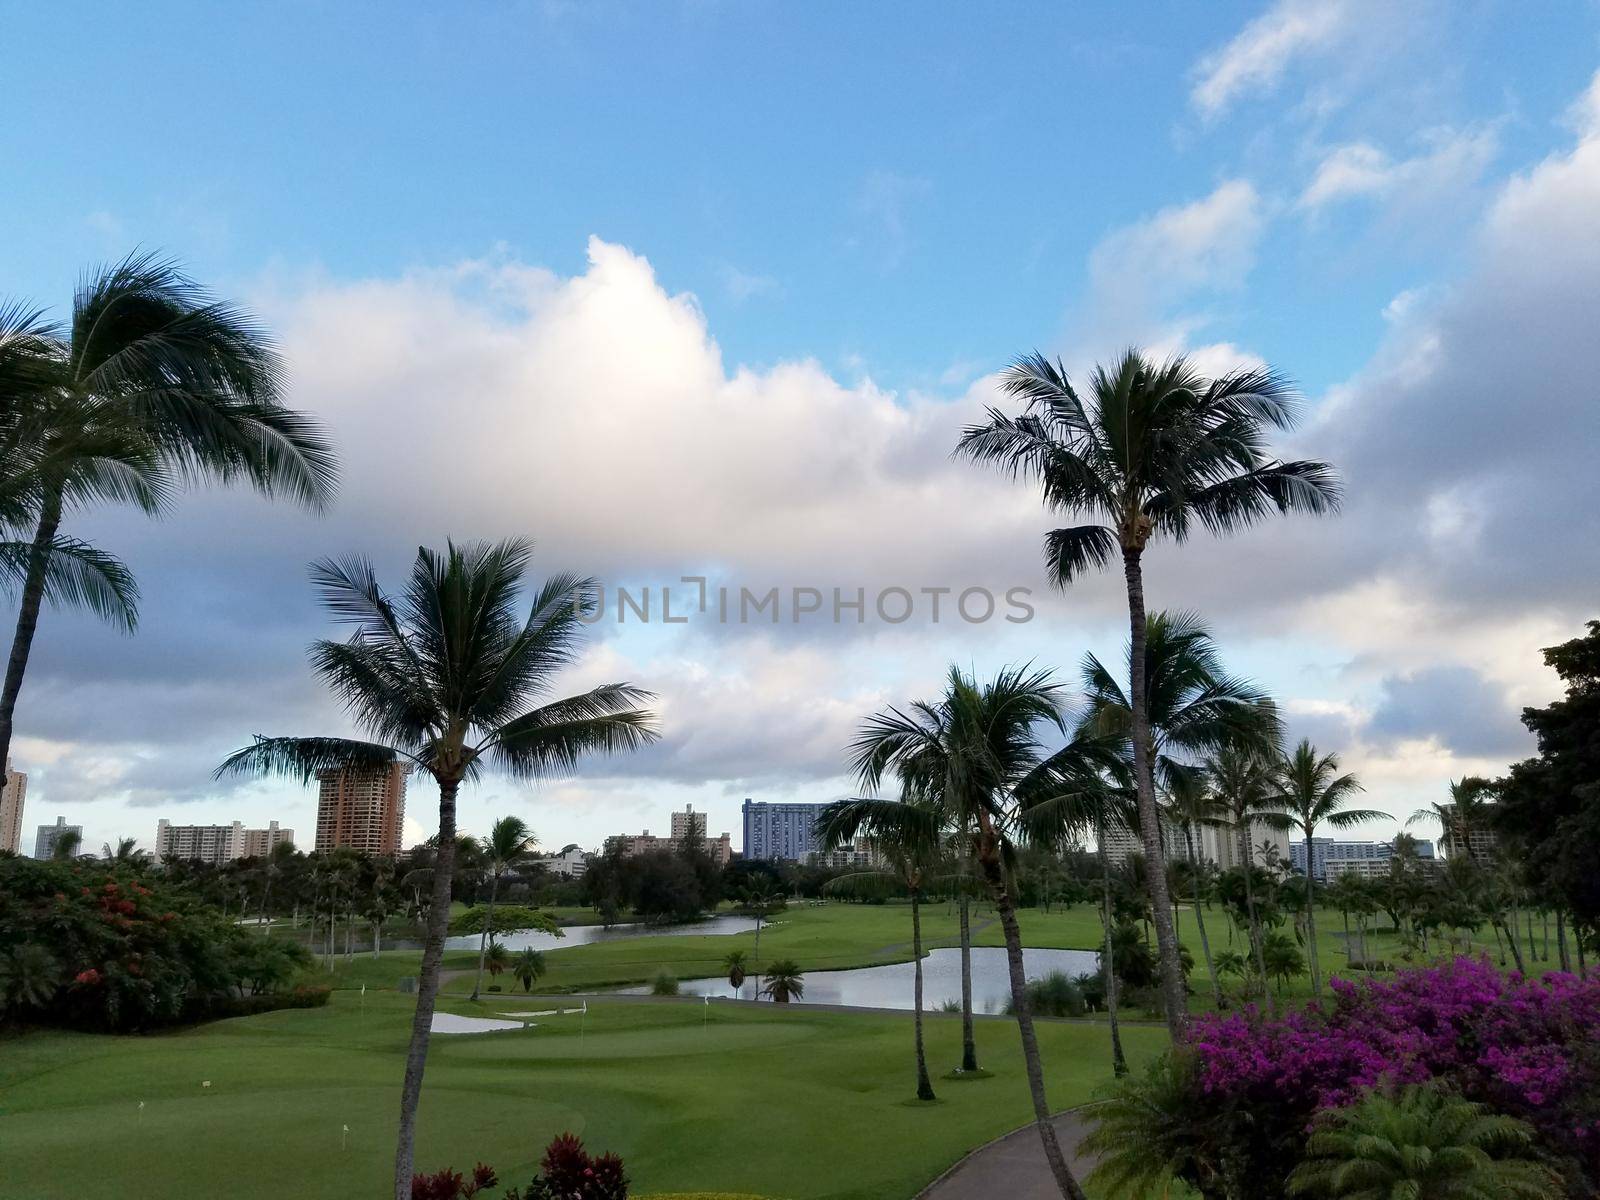 Honolulu - August 6, 2016: Honolulu Country Club Golf Course.  A hidden oasis in the heart of the city, Honolulu Country Club is the ultimate private club experience.